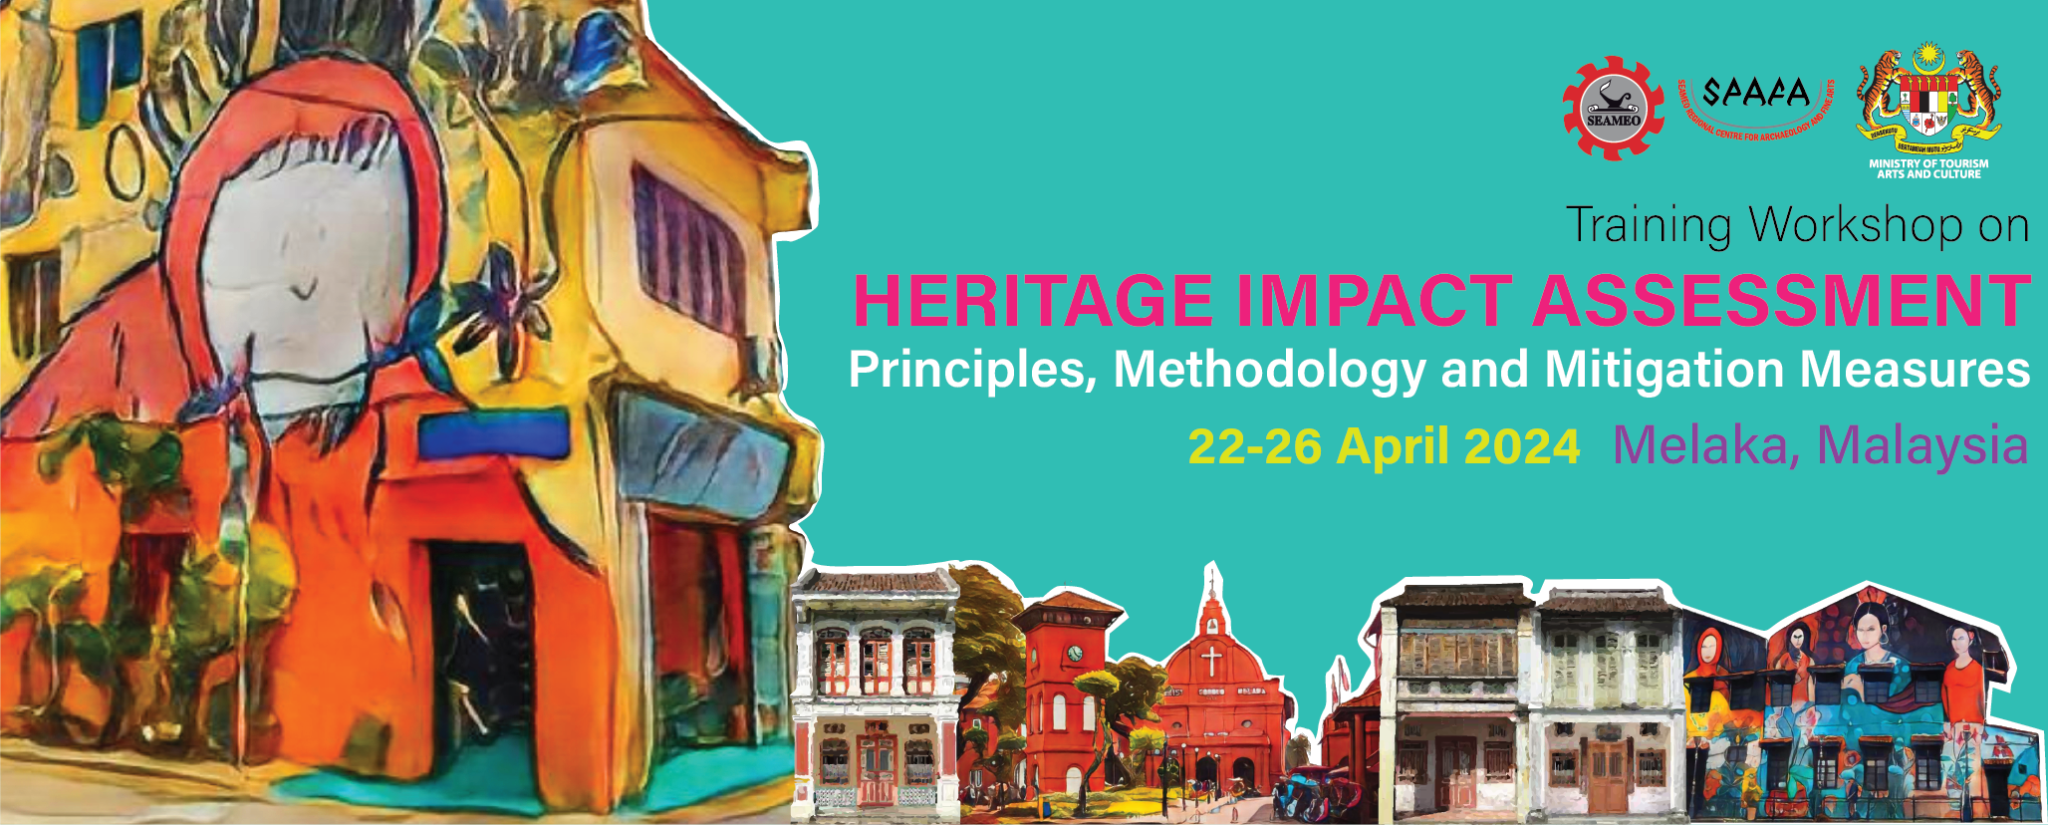 EXTENDED [Apply Now] Training Workshop on Heritage Impact Assessment in Southeast Asian Context: Principles, Methodology and Mitigation Measures (Deadline: 19 Jan 2024)